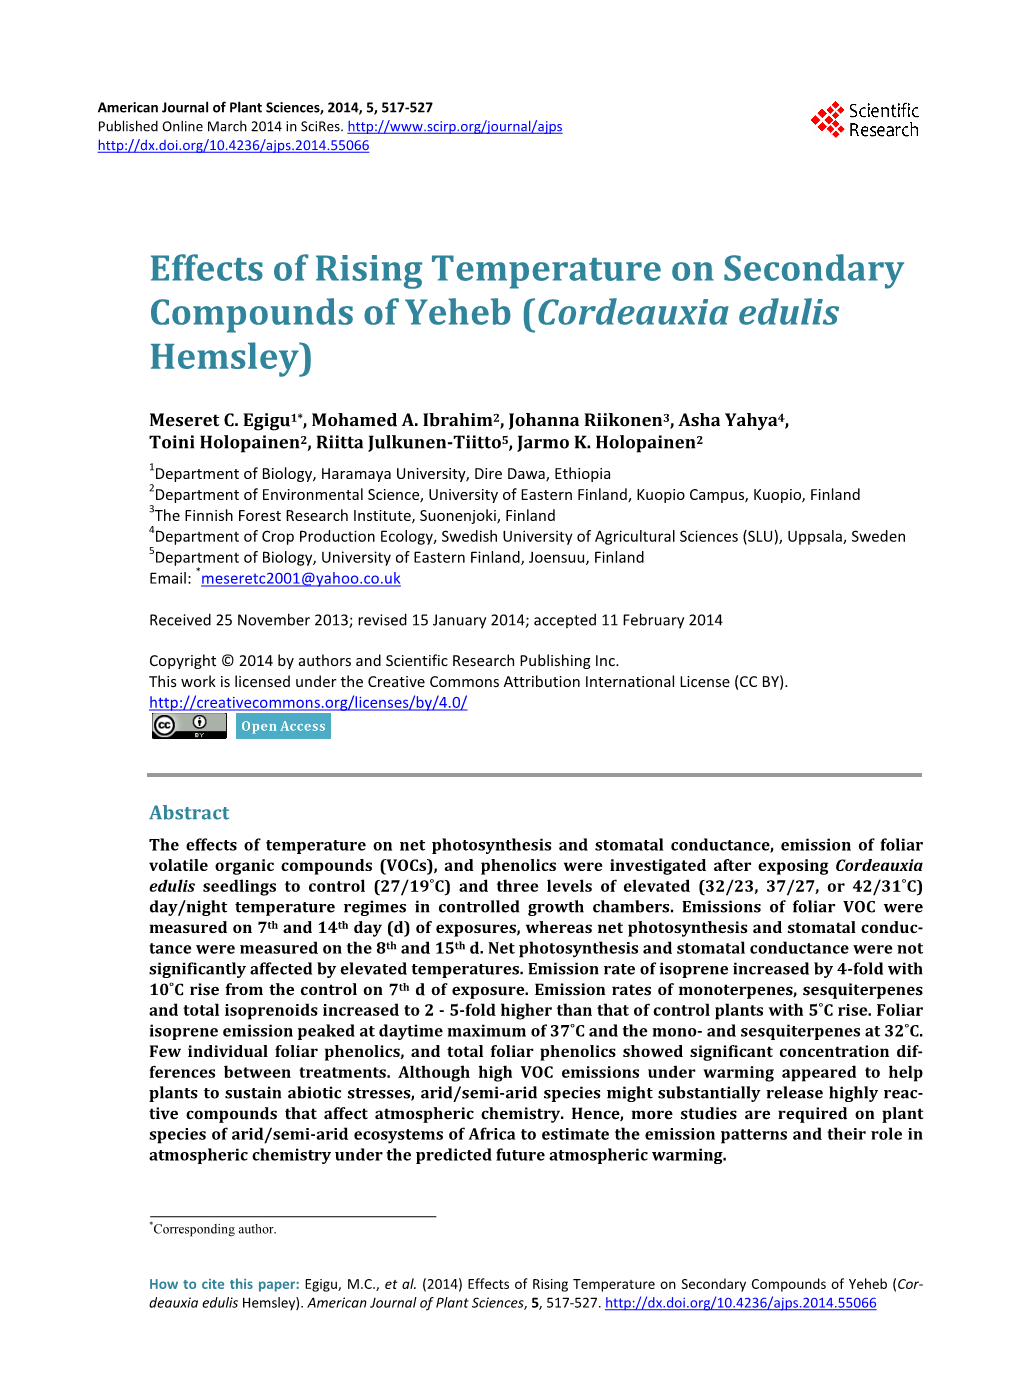 Effects of Rising Temperature on Secondary Compounds of Yeheb (Cordeauxia Edulis Hemsley)